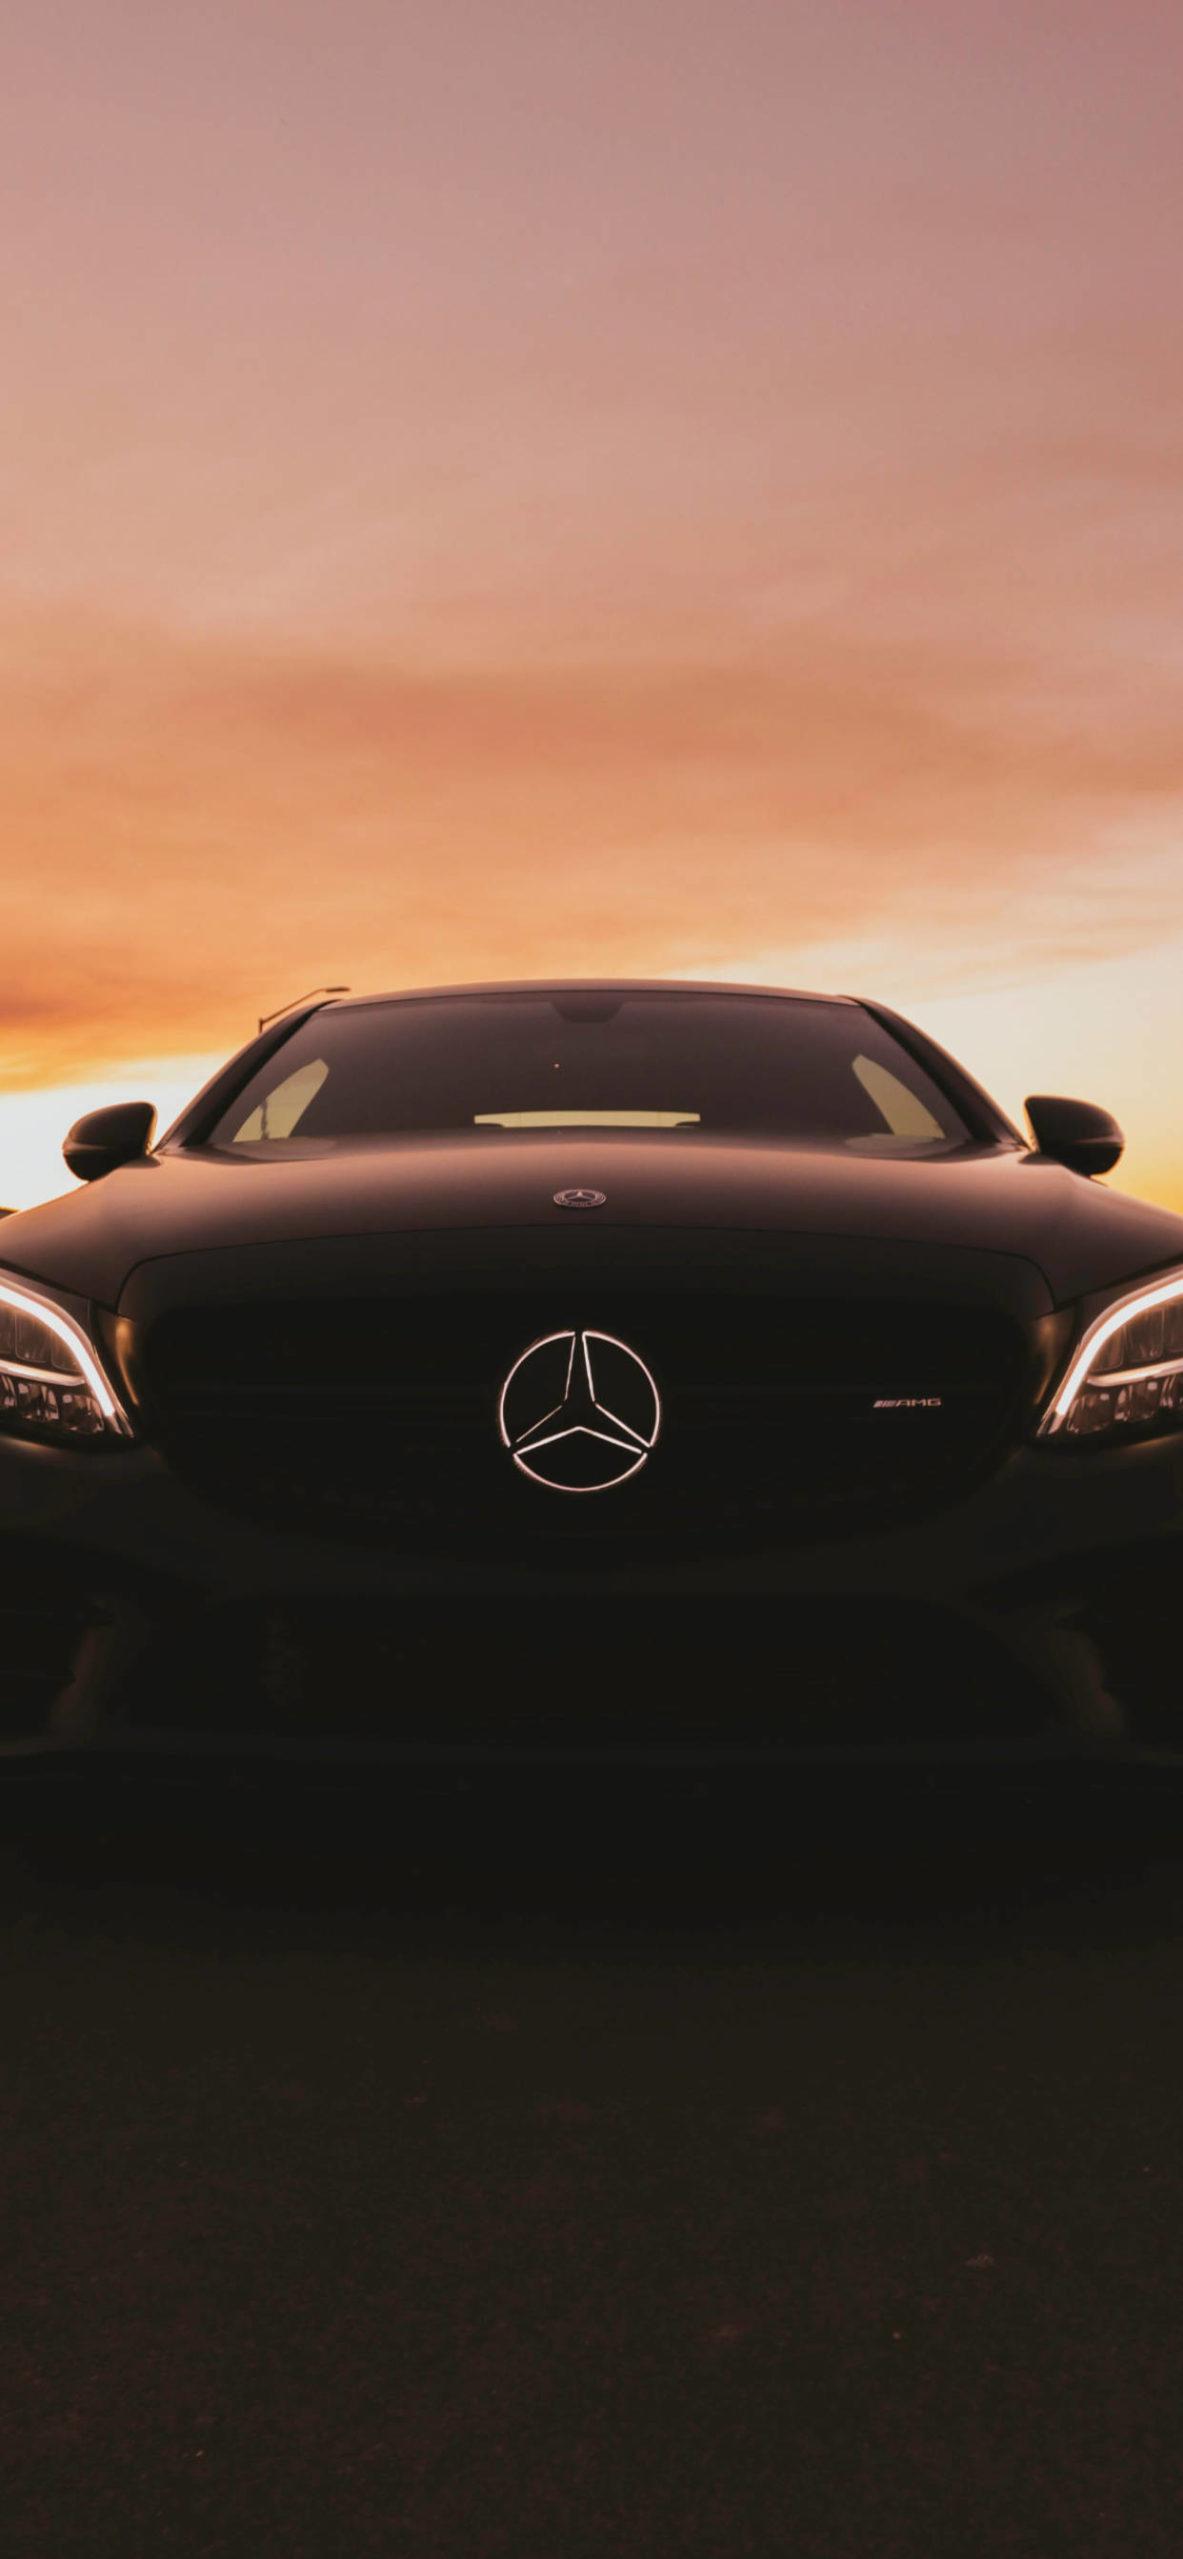 Mercedes Benz Wallpaper for iPhone 11 Pro Max X 8 7 6   Free